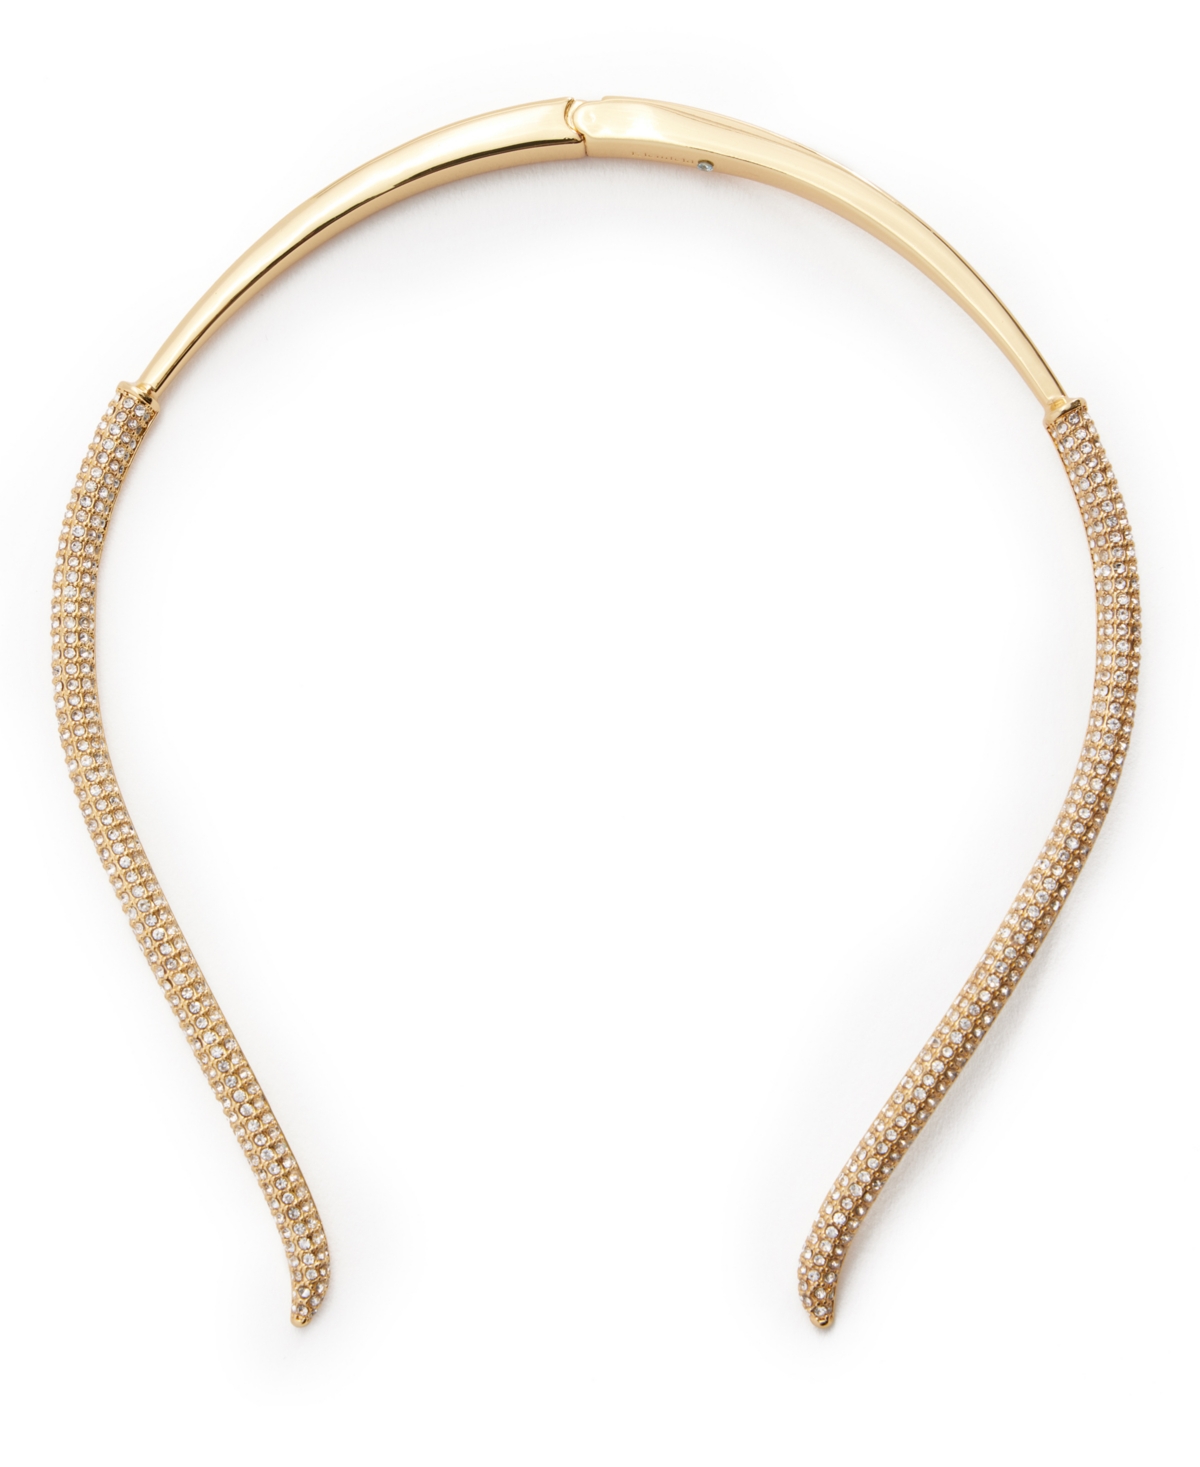 Faux Stone Pave Hinged Collar Necklace - Crystal, Gold